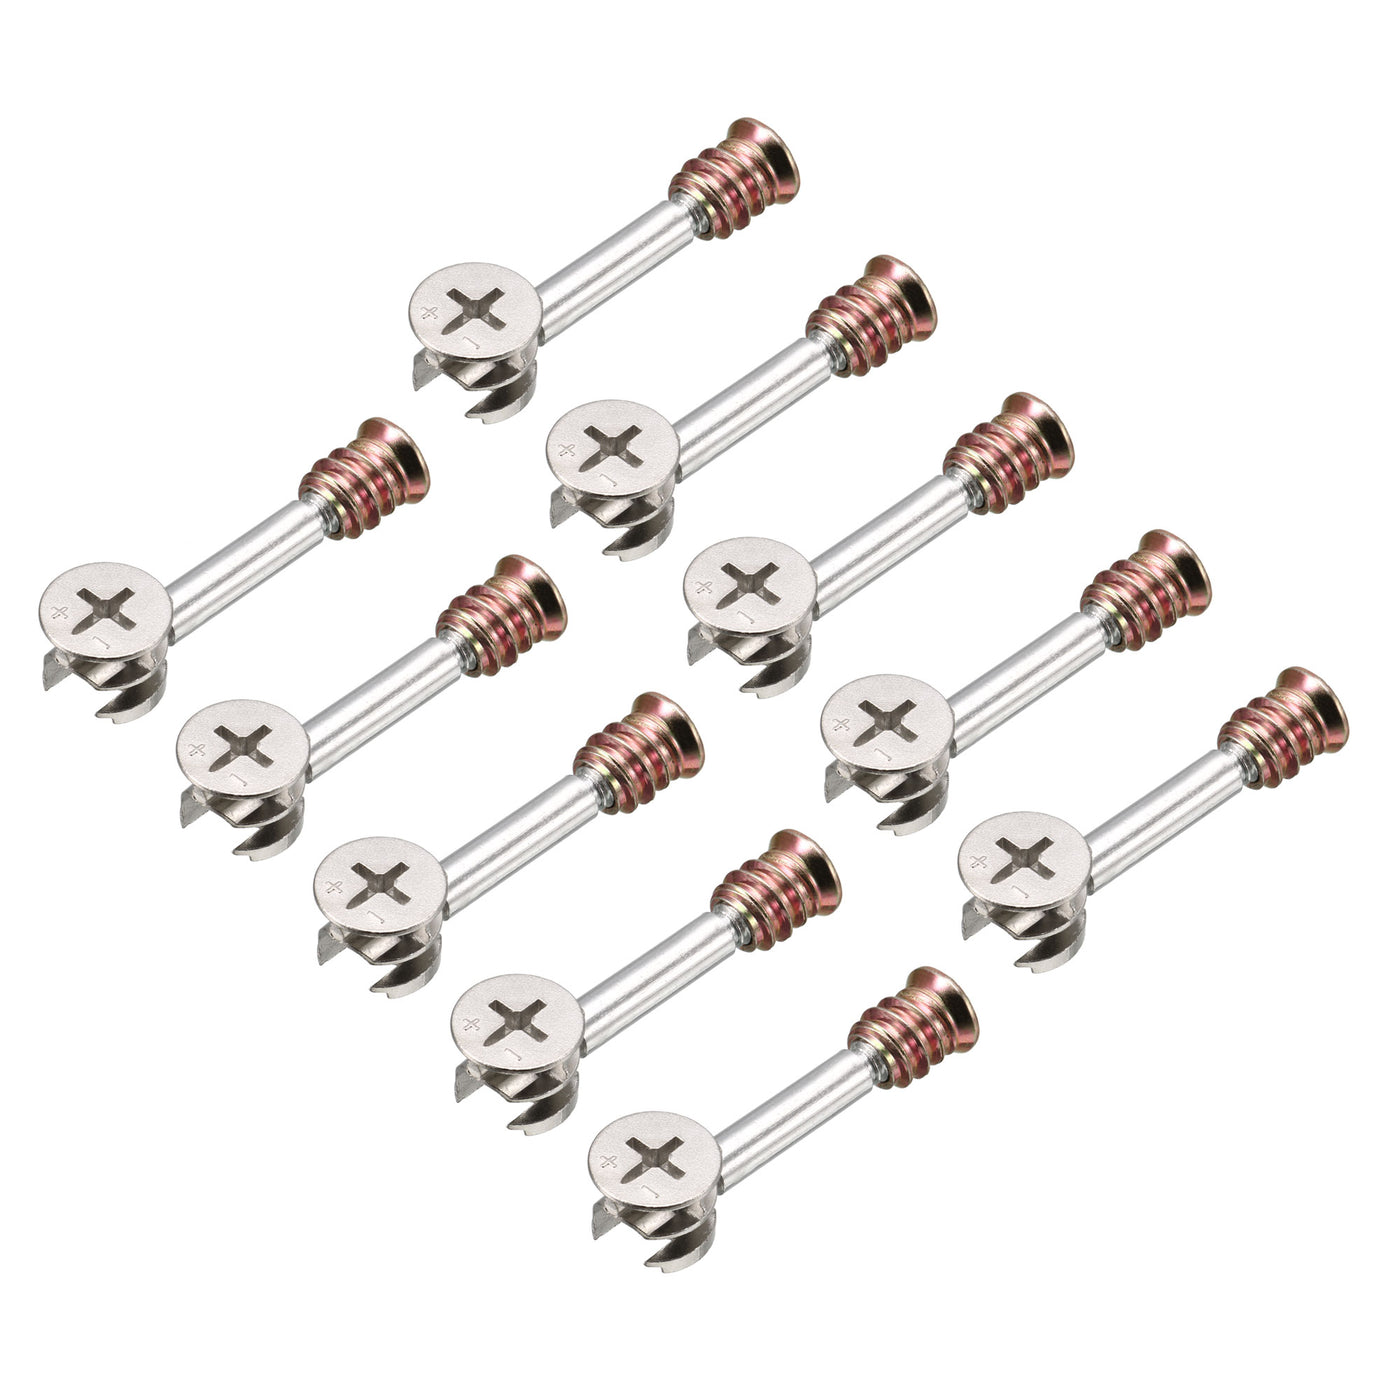 uxcell Uxcell 10 Sets Furniture Connecting 15mm OD Cam Self-tapping Fitting with Dowel Nut